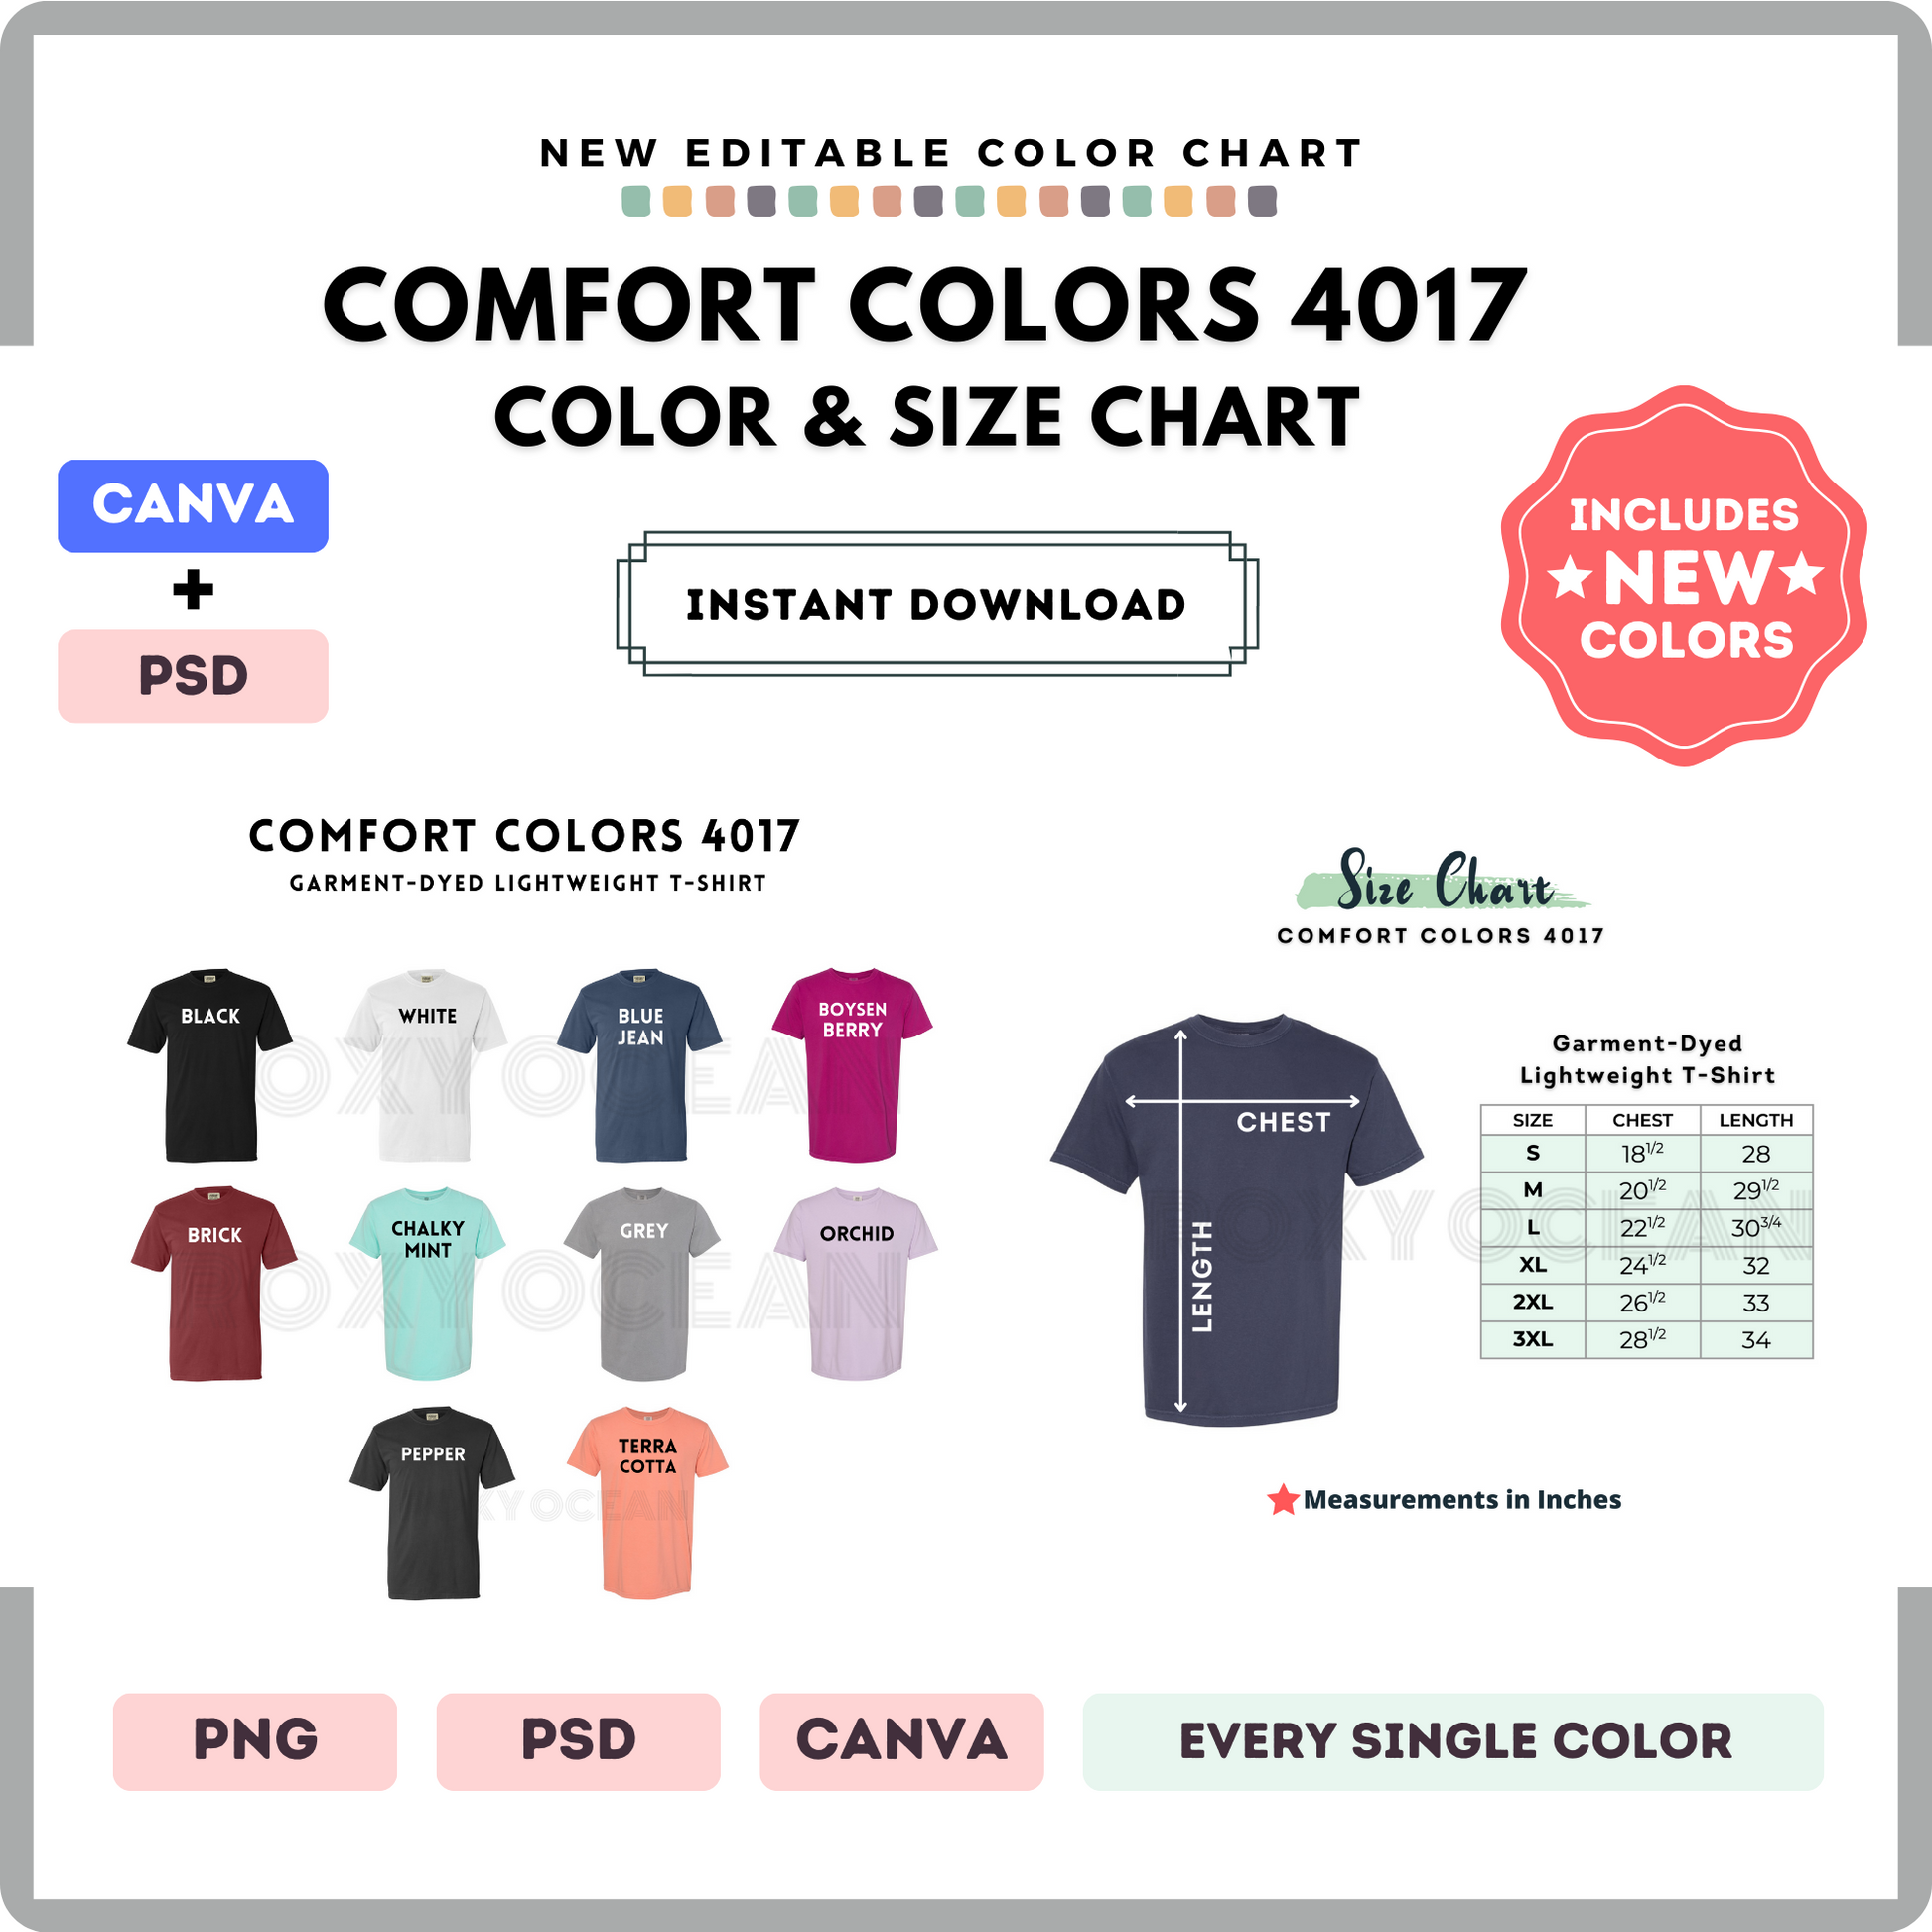 Comfort Colors 4017 Color and Size Chart